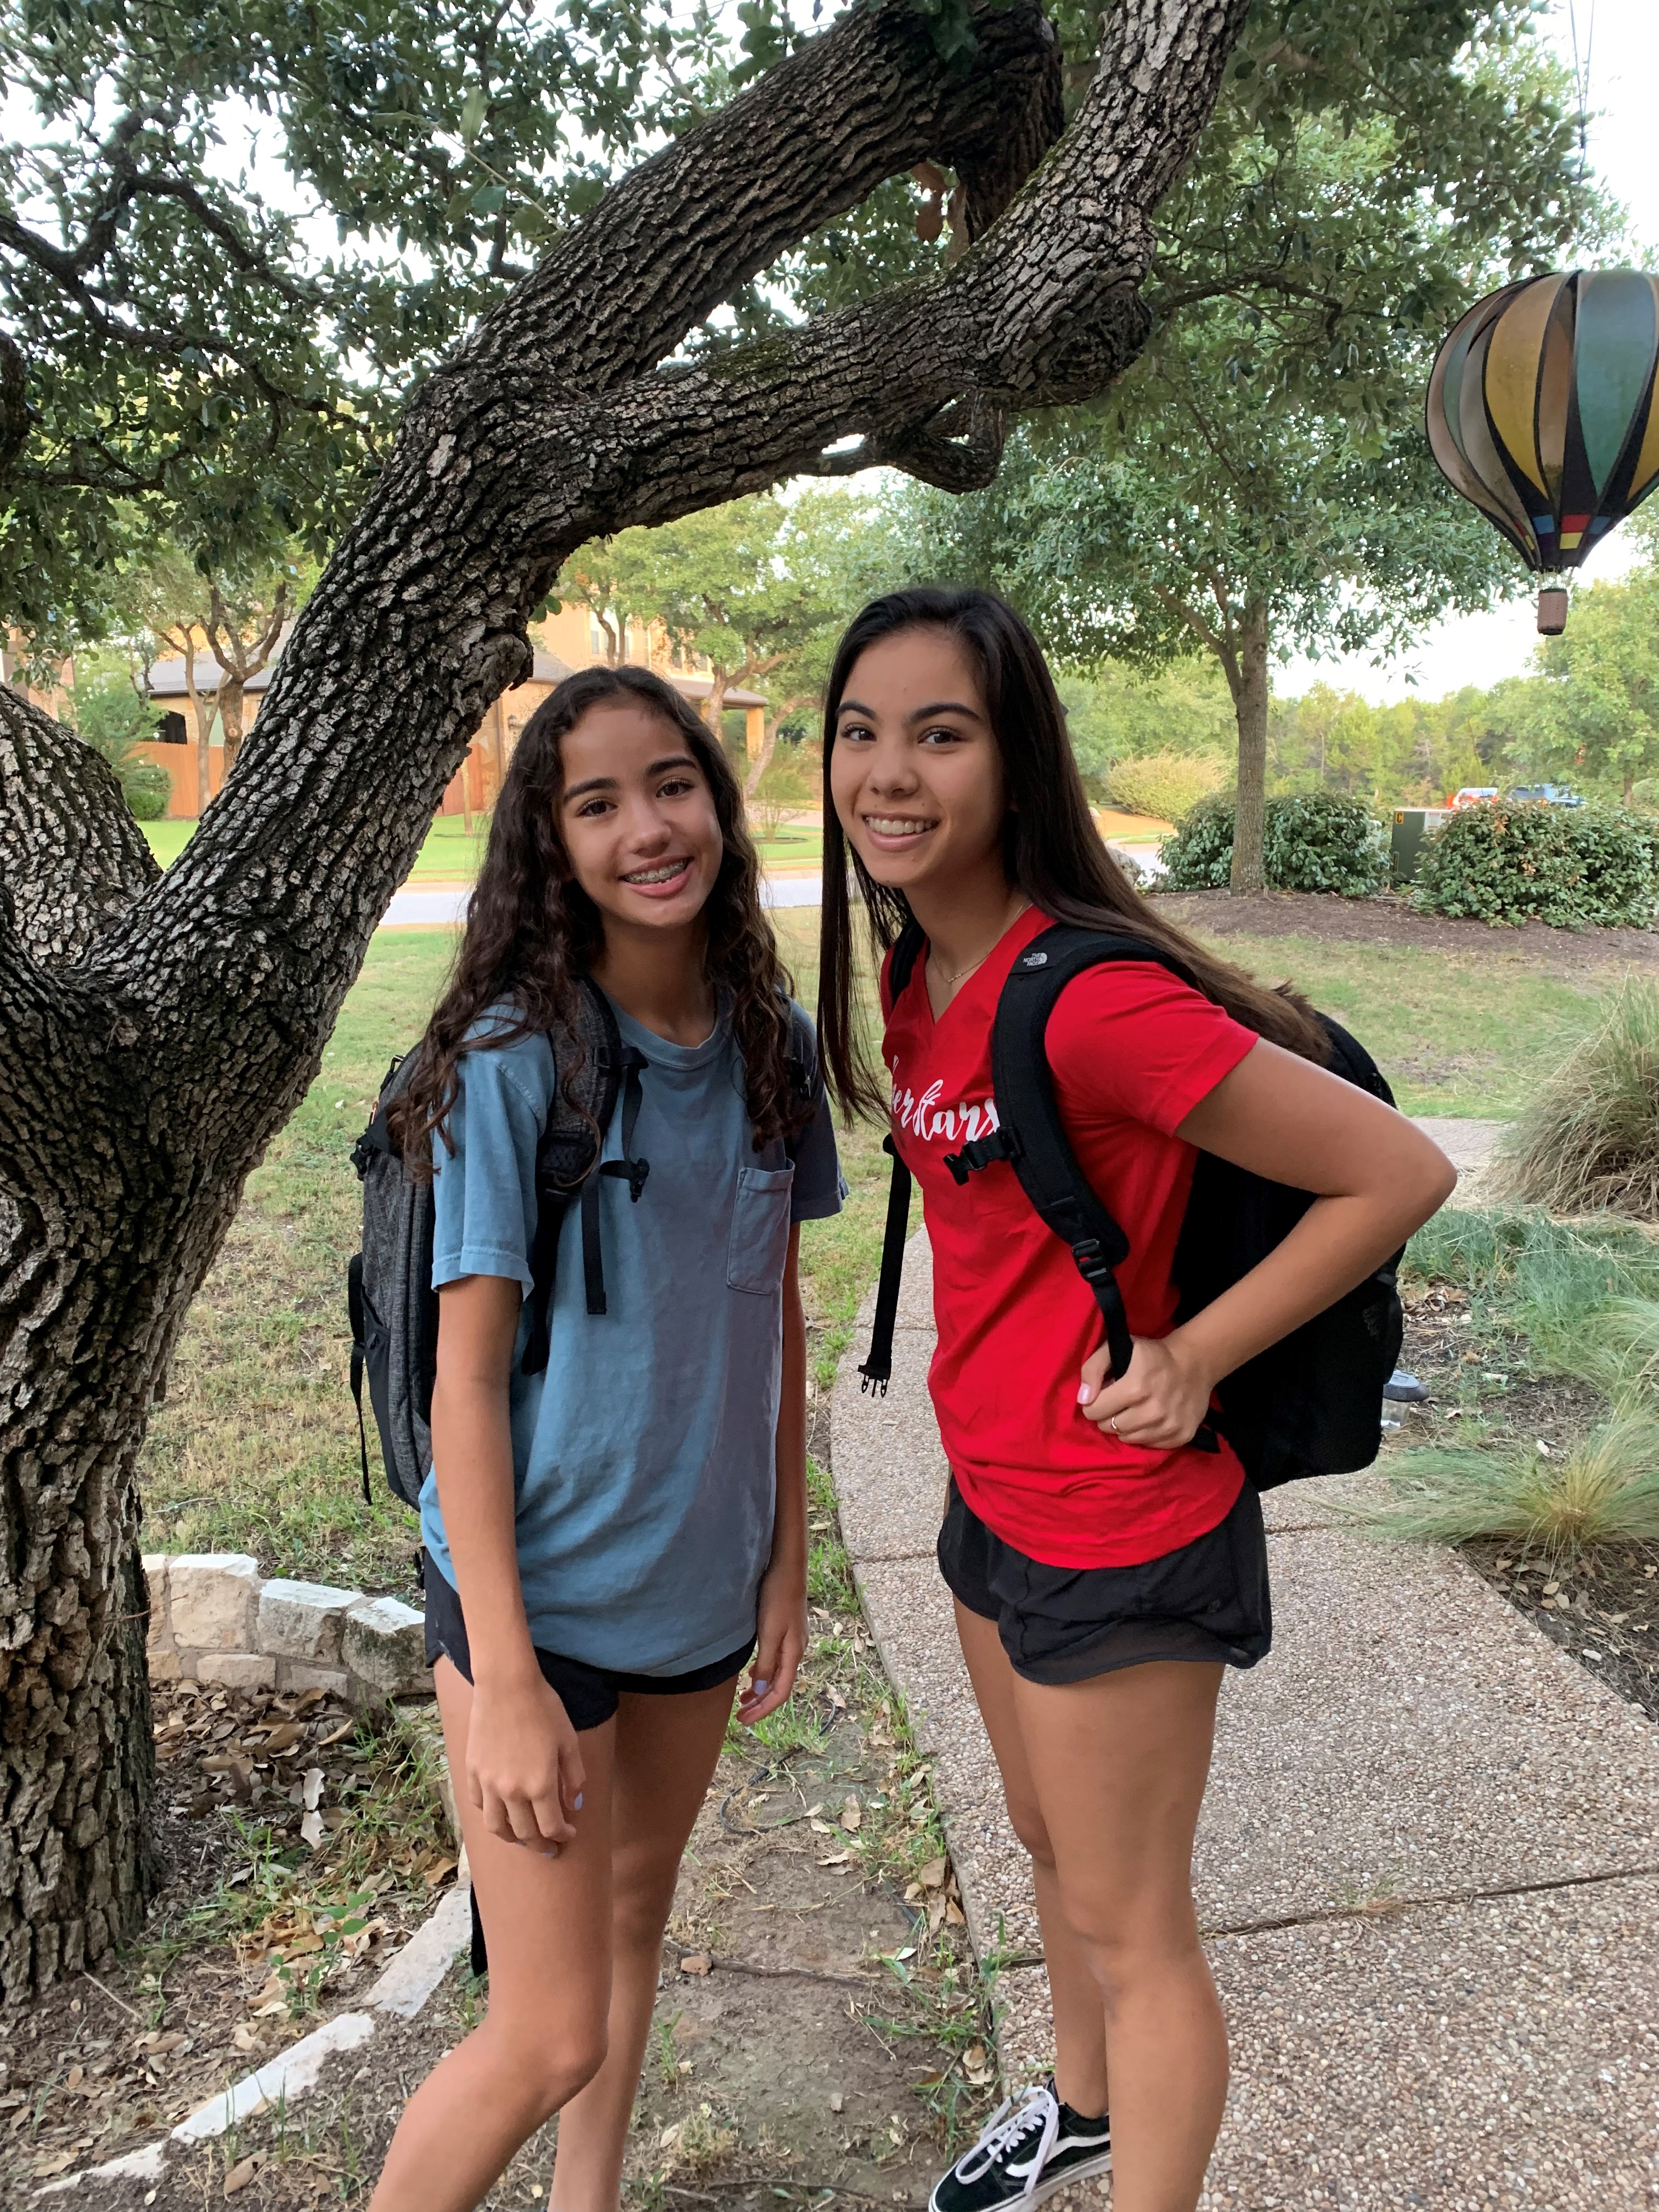 Melina (right, 10th grate) and Olivia (left, 8th grade)